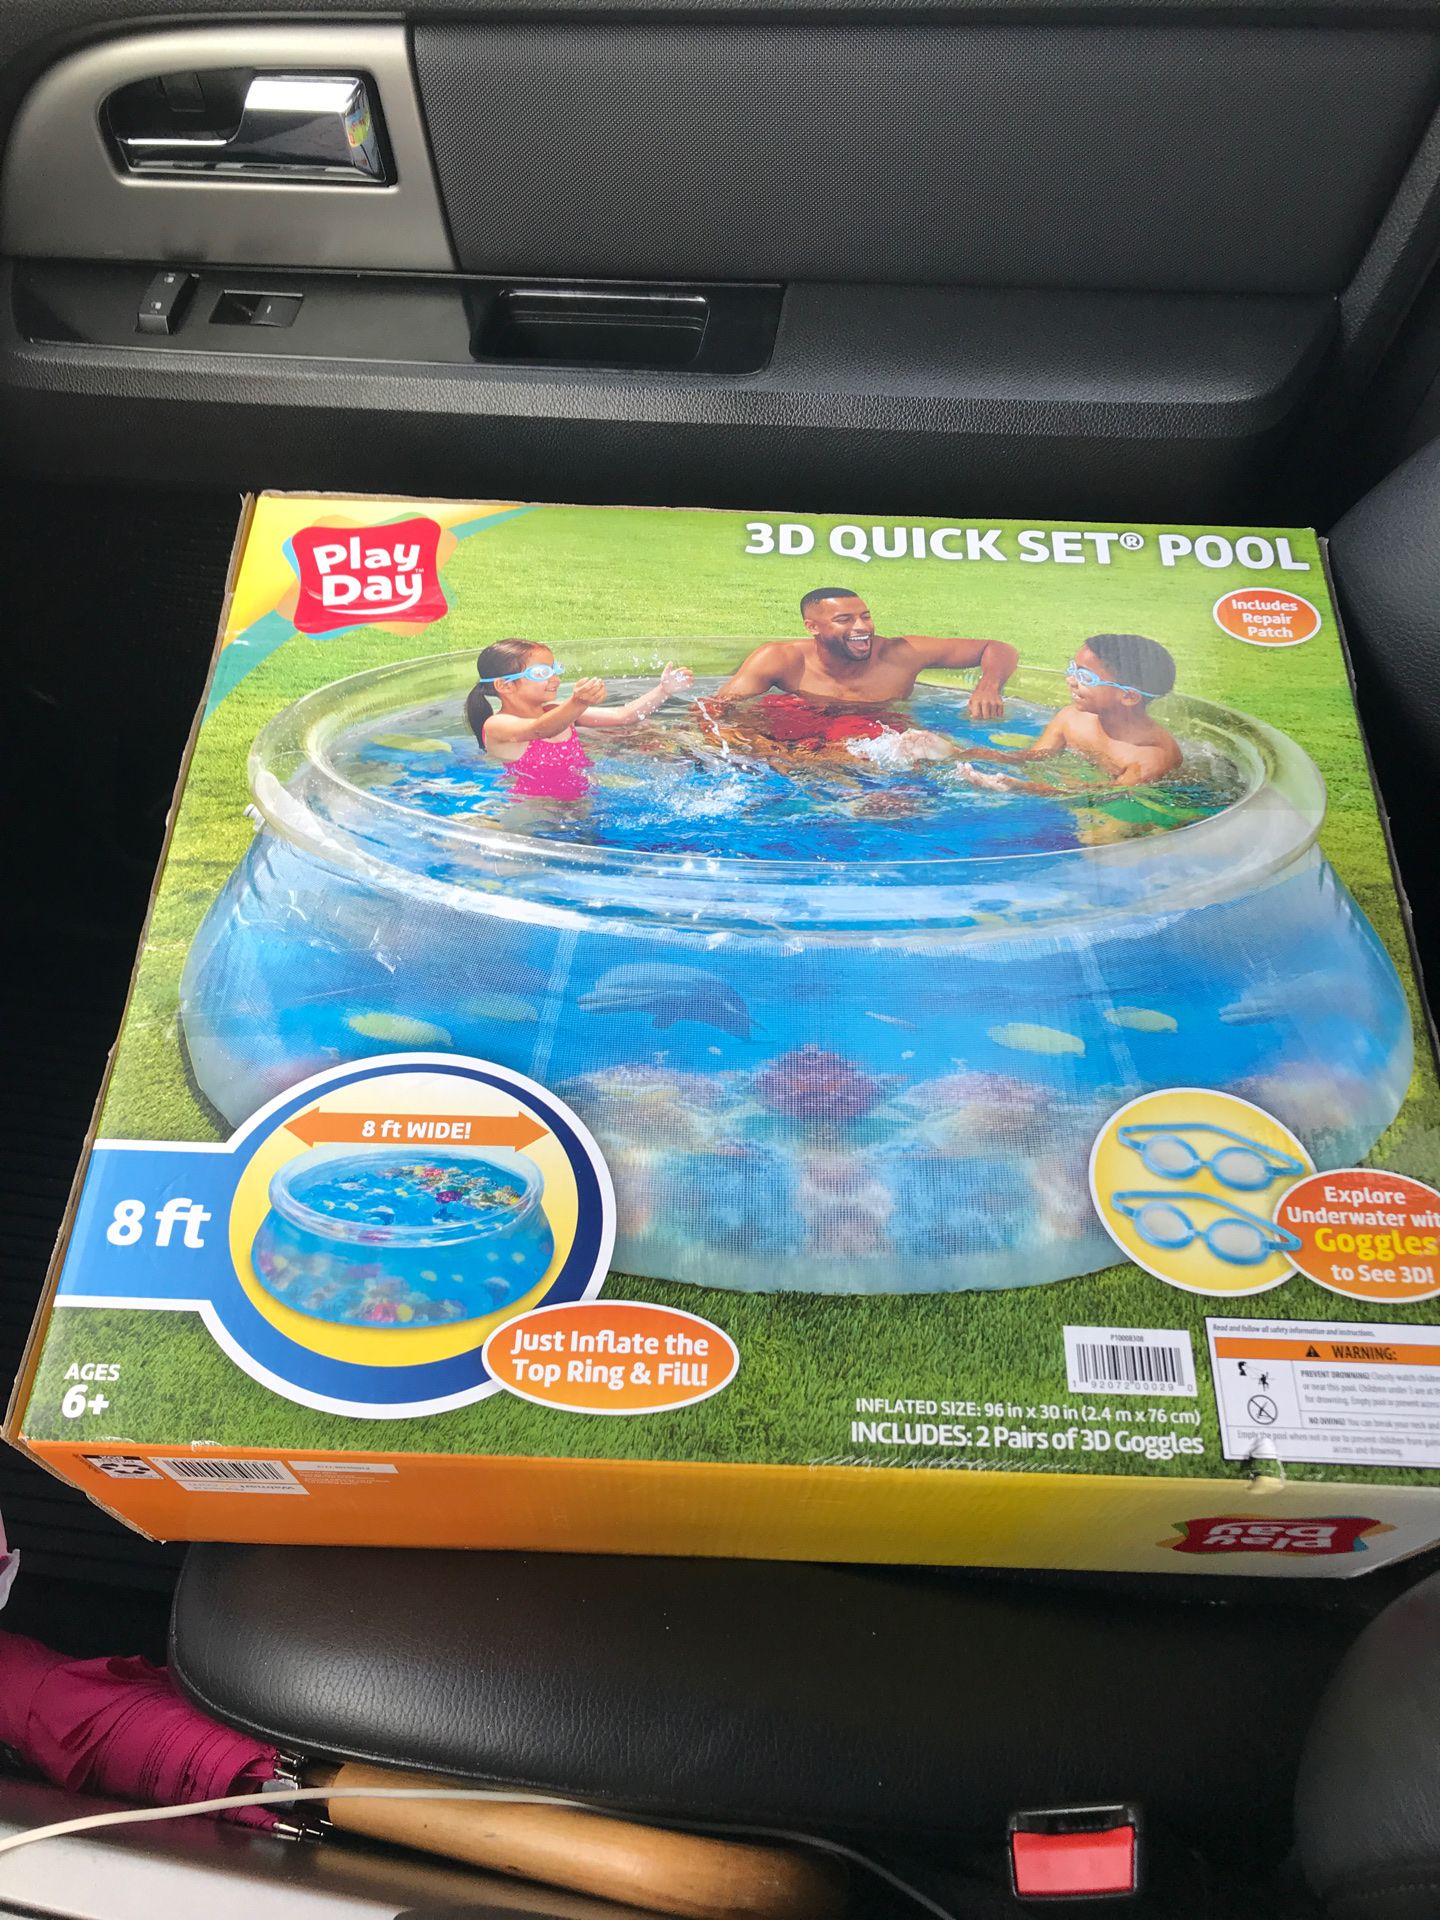 Play day 3D Quick Set Pool